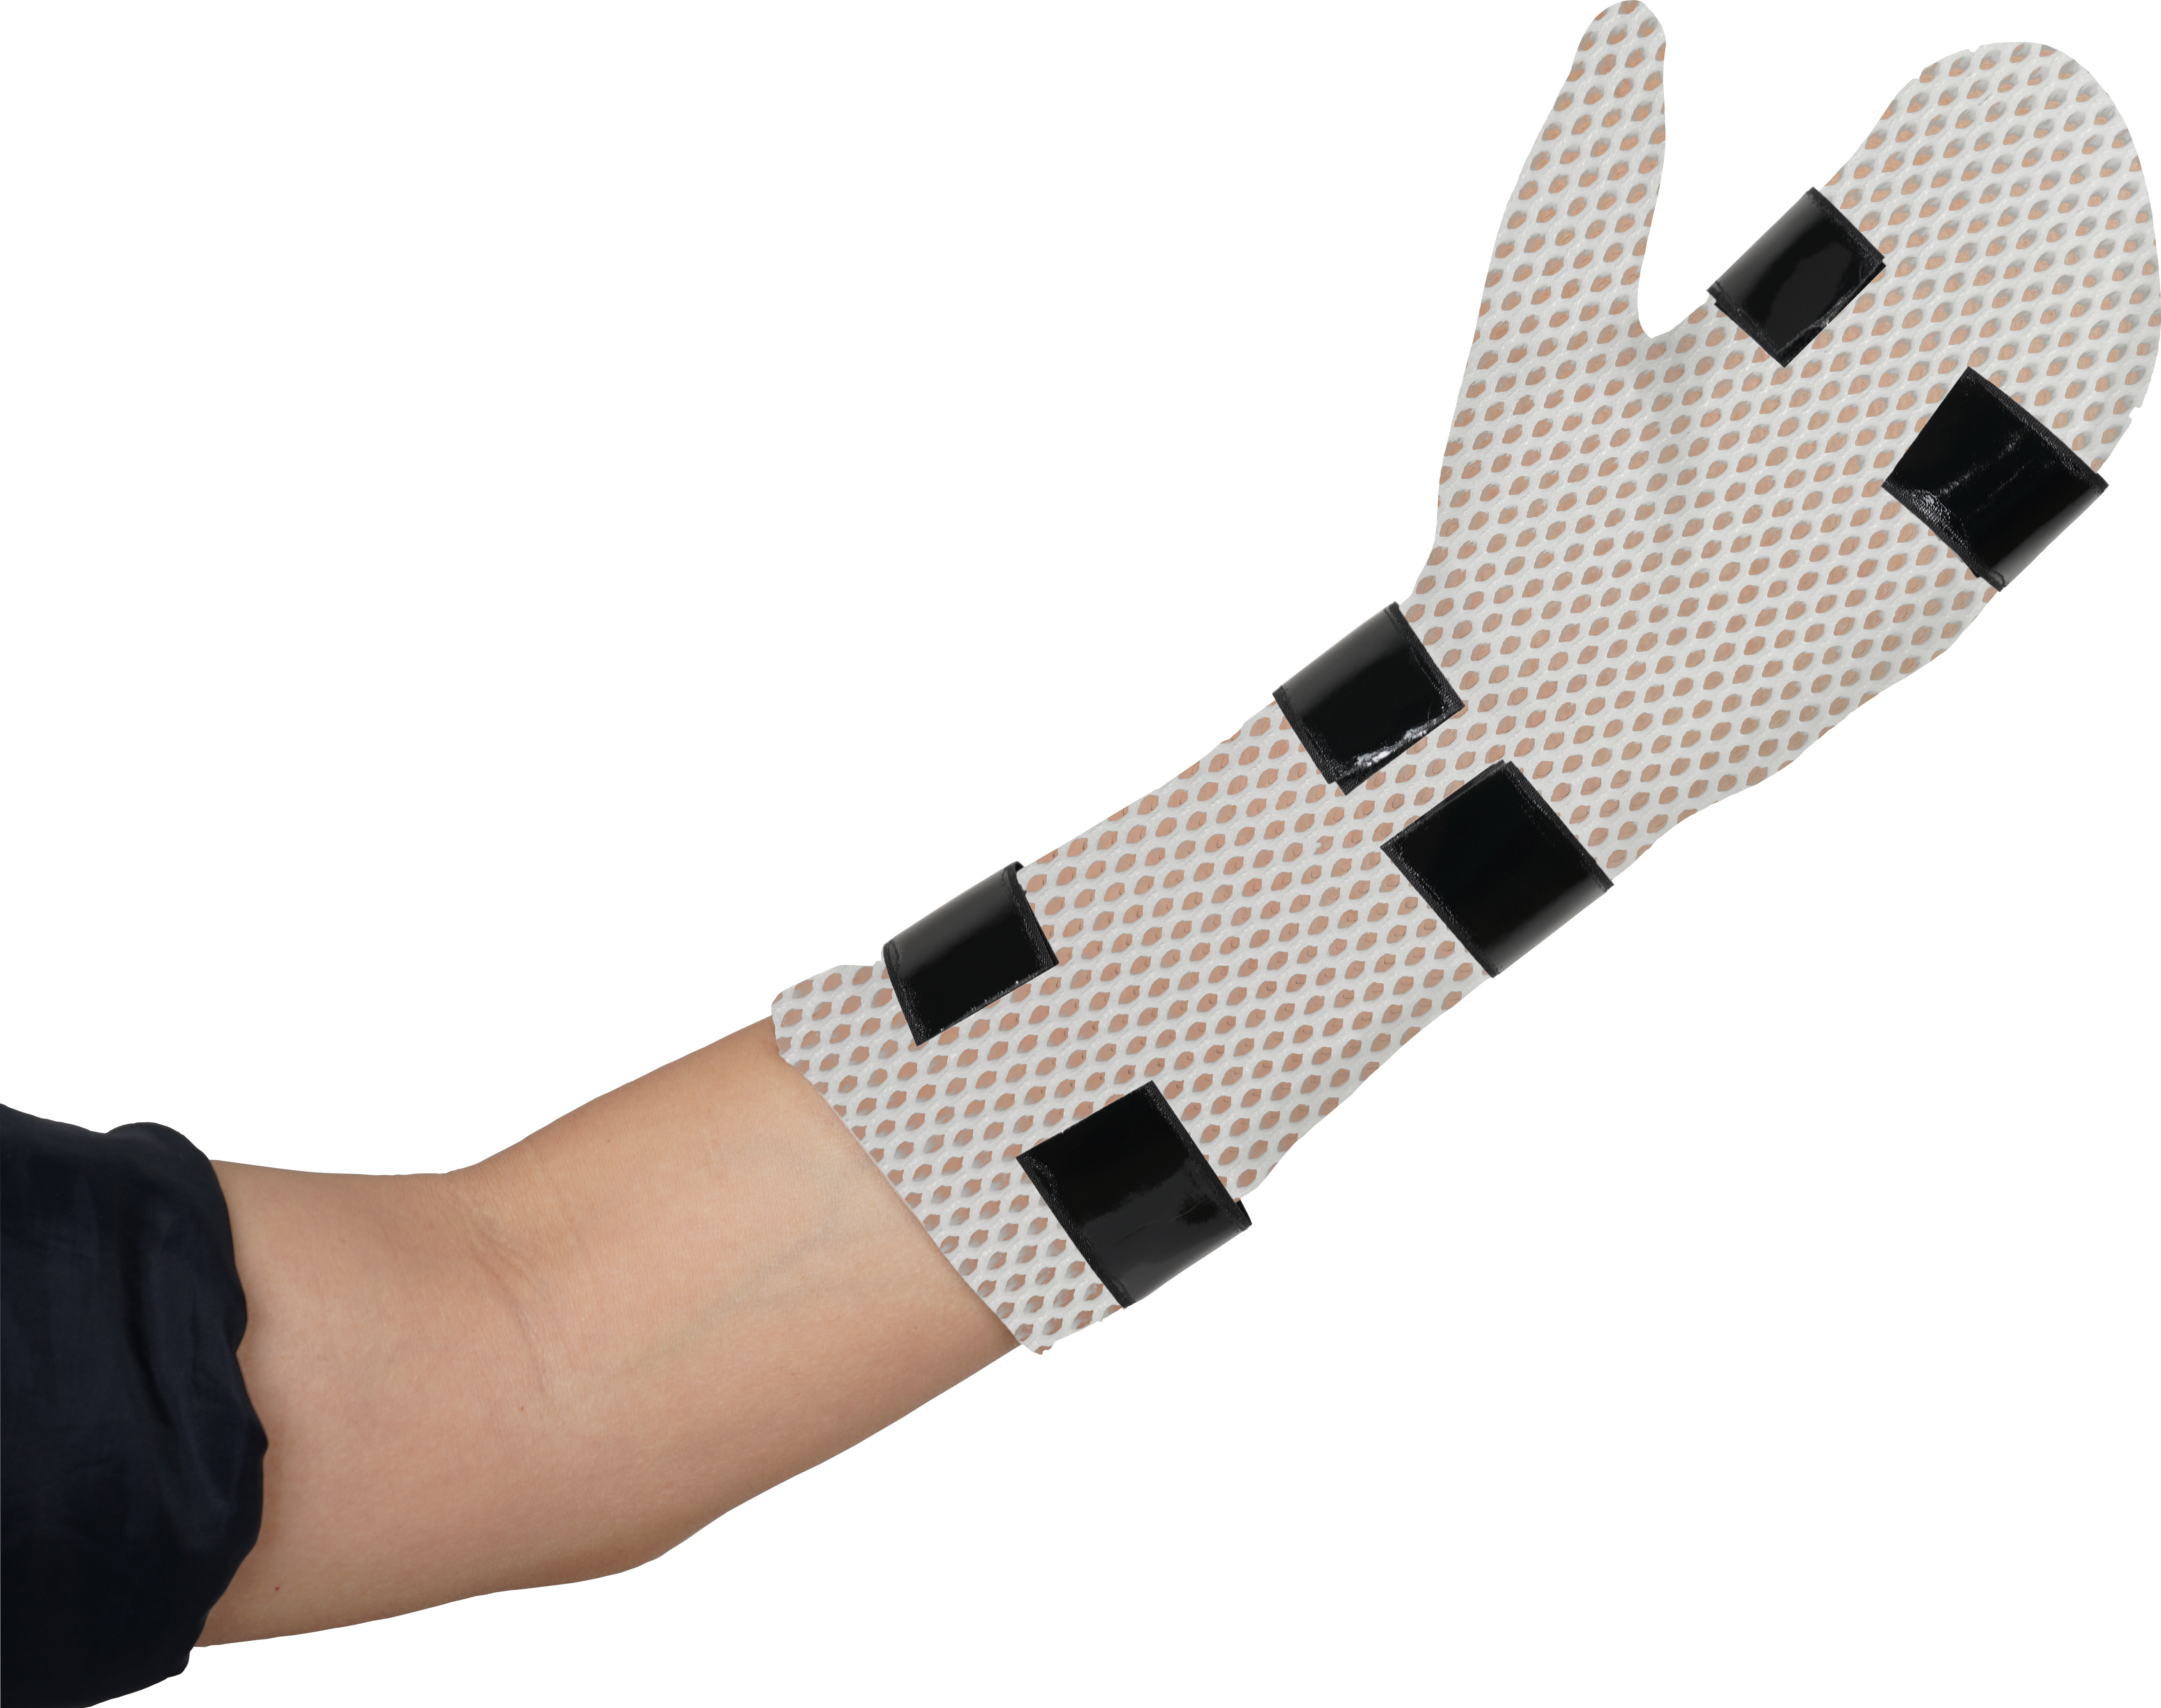 What is the thermoplastic splint made of?